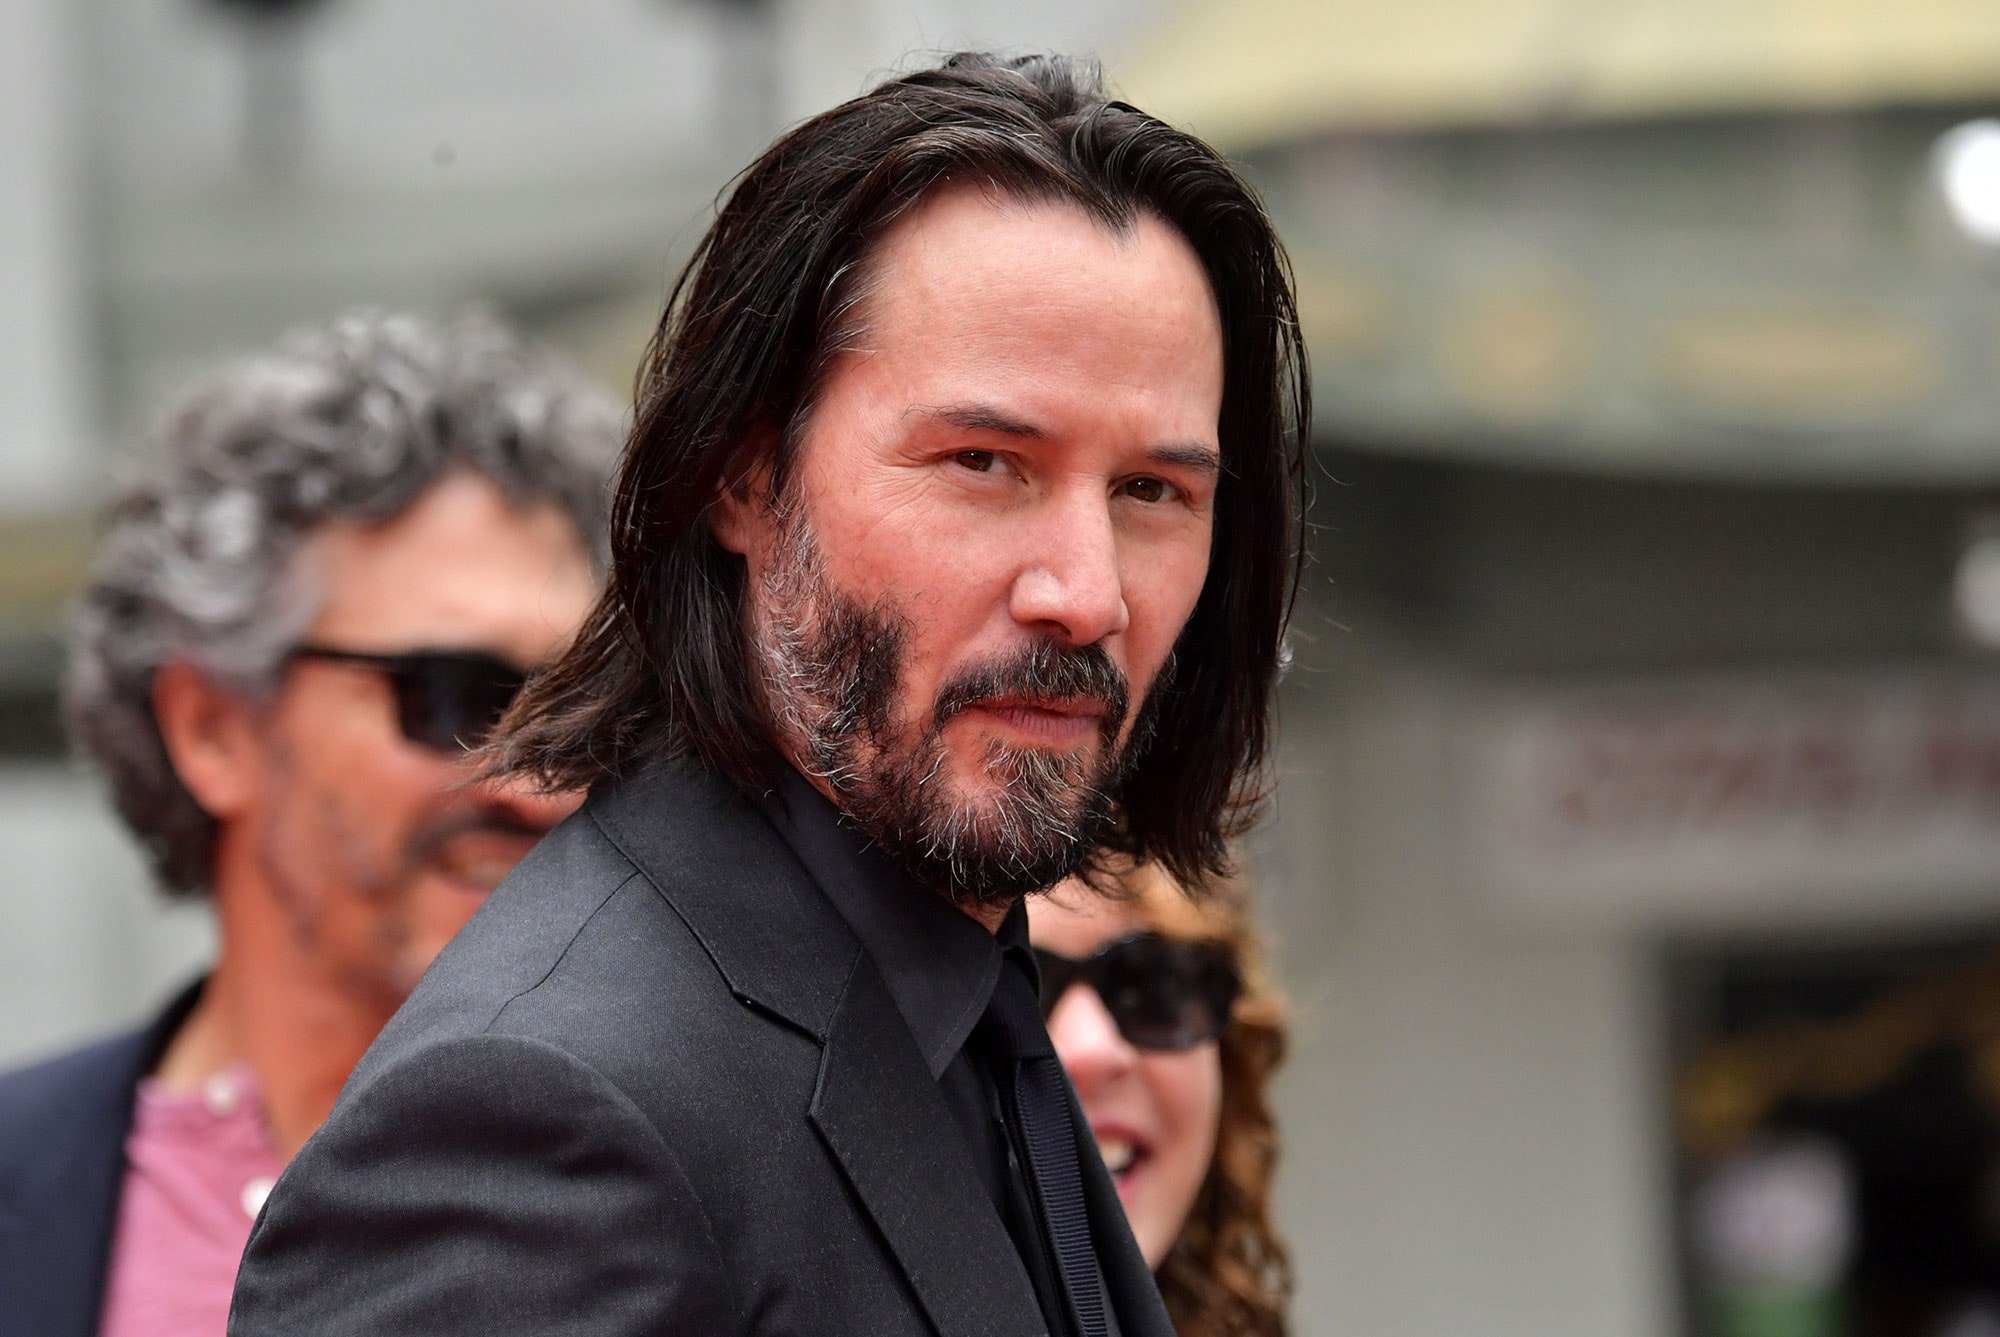 Keanu Reeves Wiki, Bio, Age, Net Worth, and Other Facts